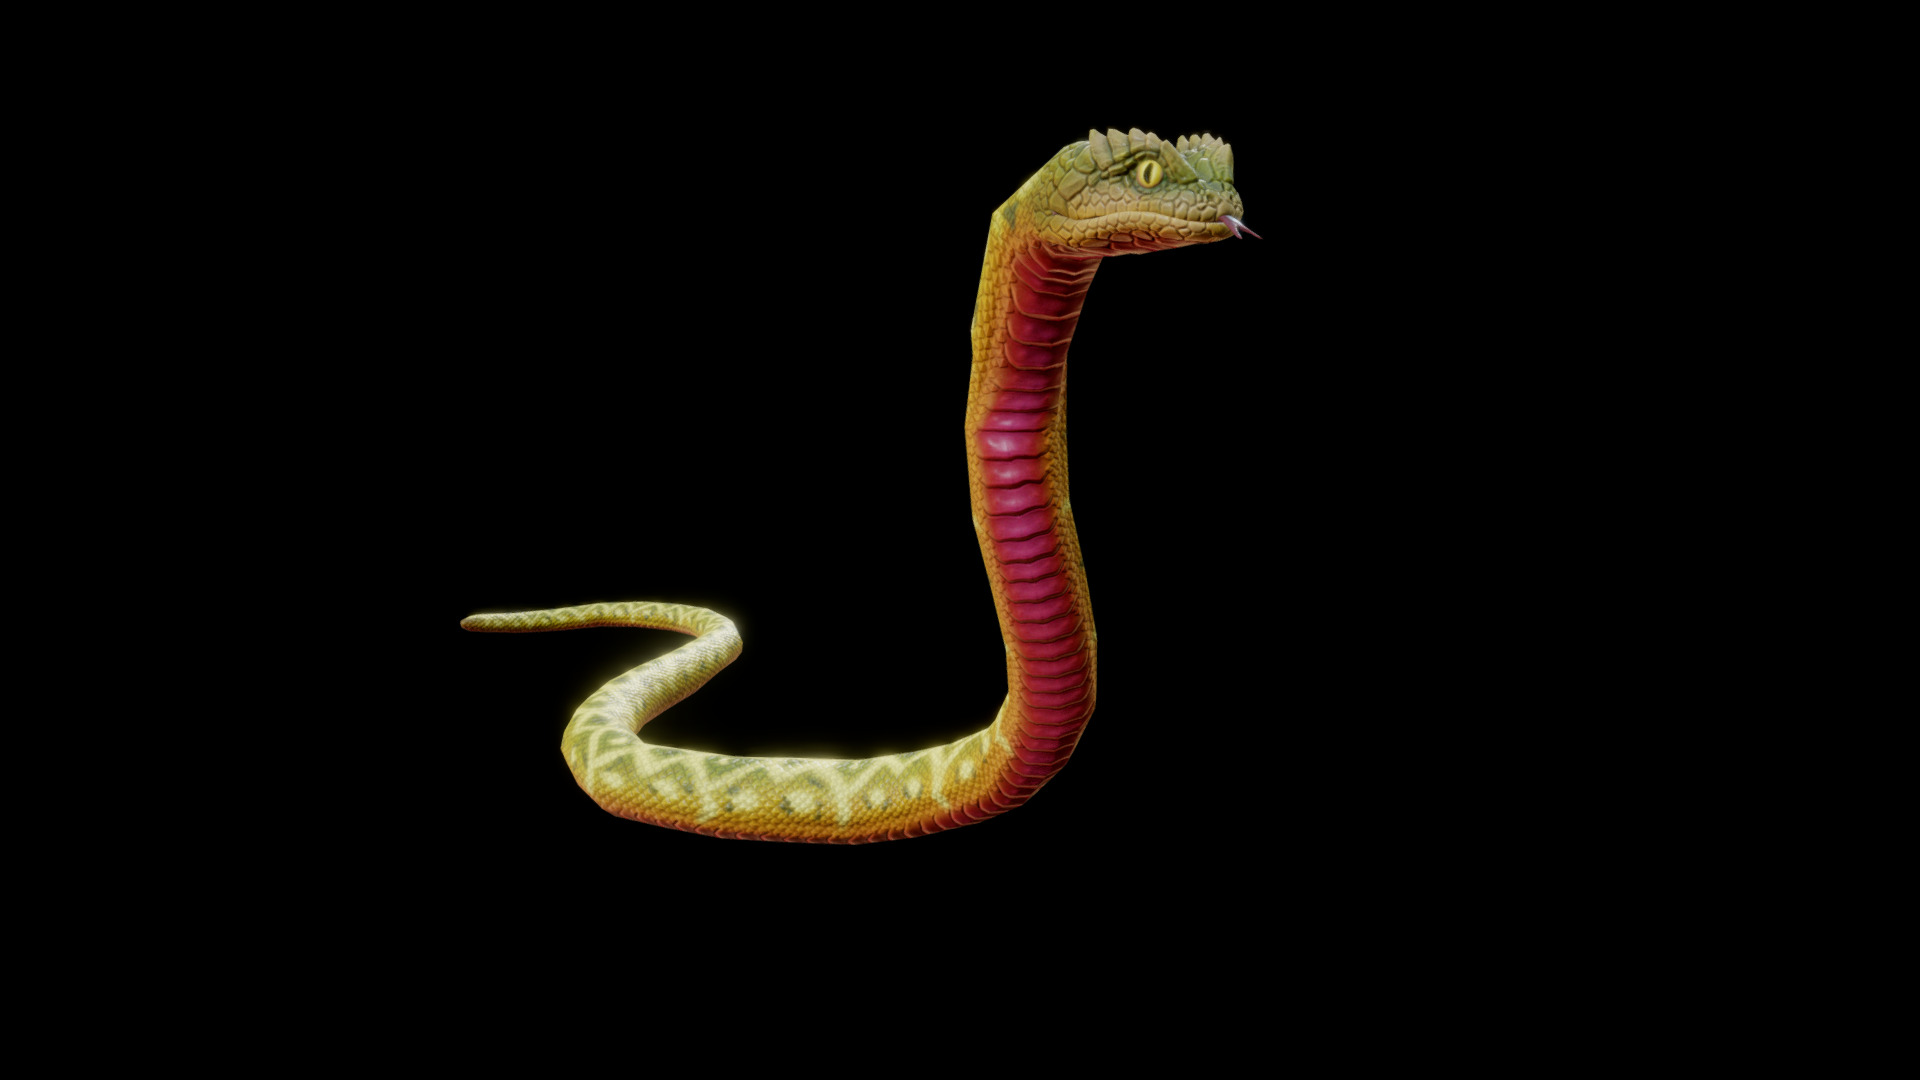 3D model GIANT VIPER ANIMATIONS - This is a 3D model of the GIANT VIPER ANIMATIONS. The 3D model is about a snake with a pink and white striped tail.